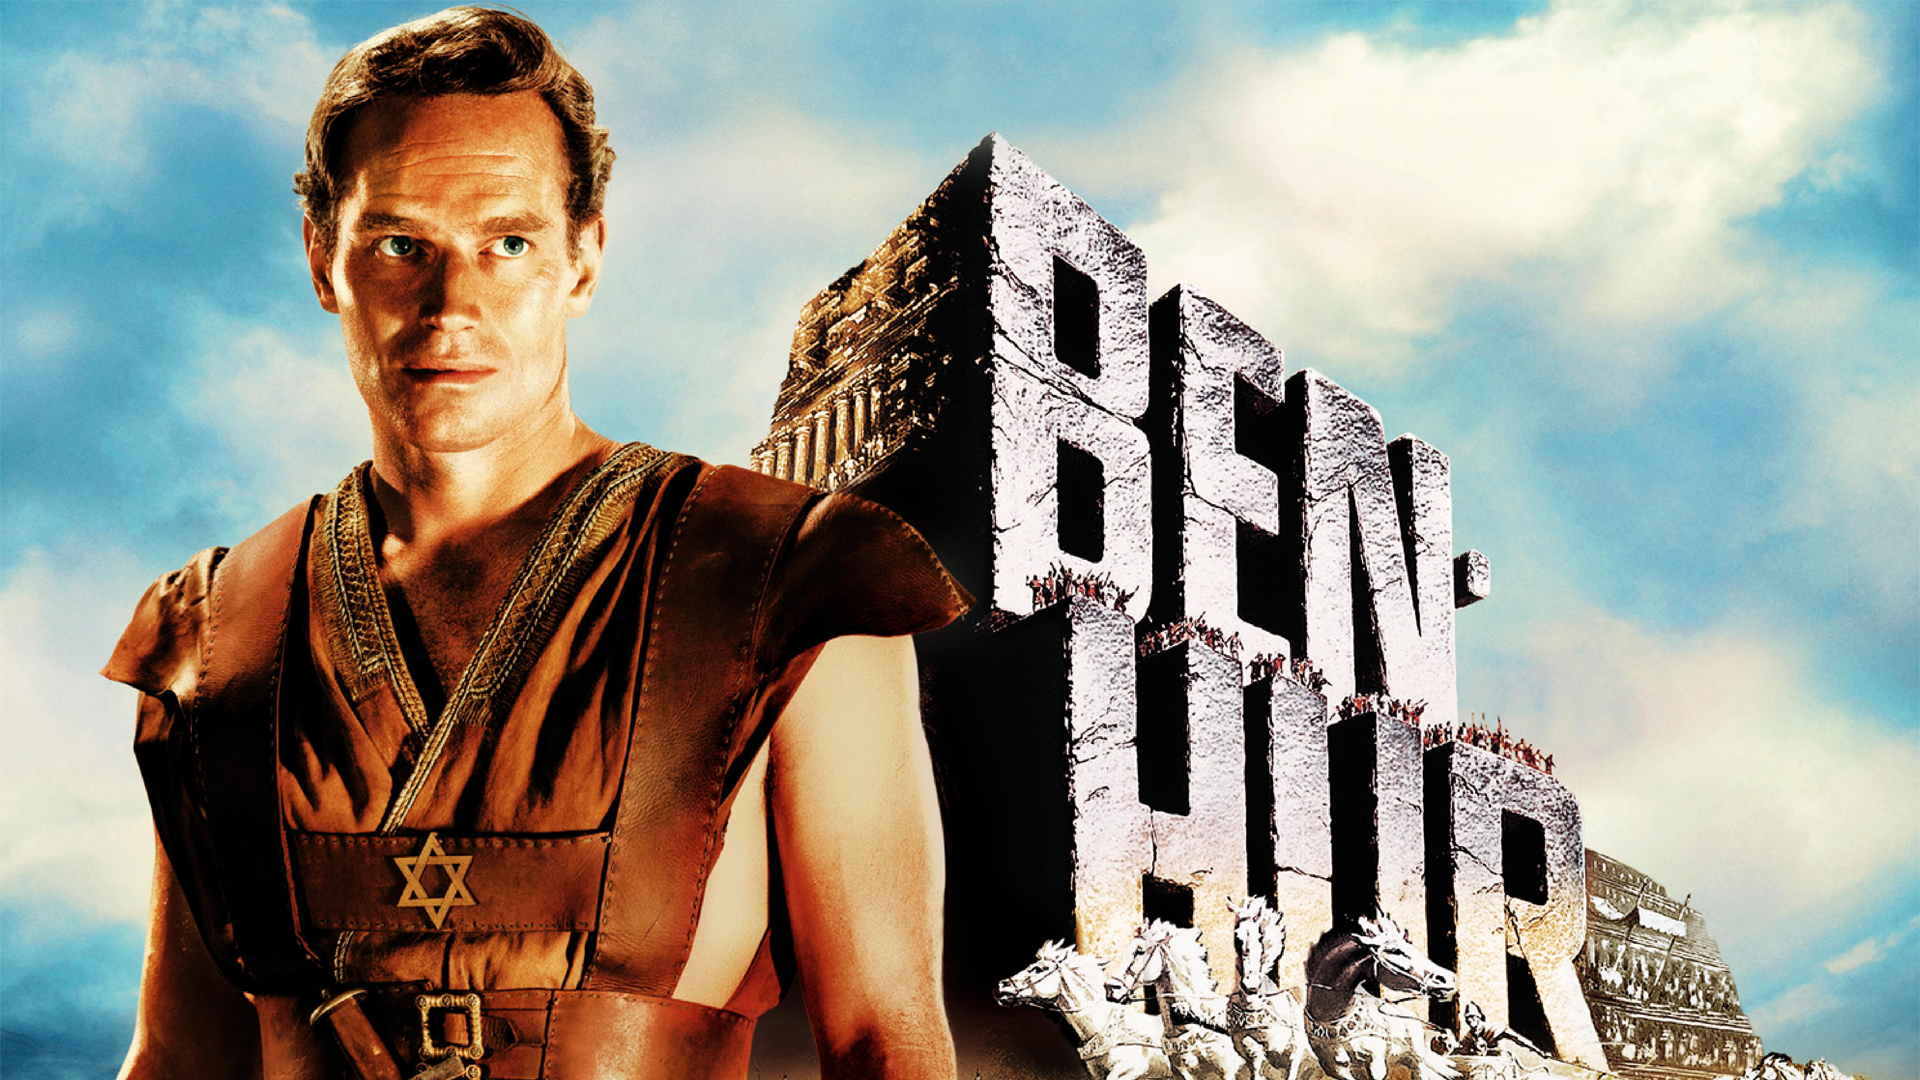 Paramount-and-MGM-announce-the-remake-release-of-Ben-Hur-in-2016.jpg